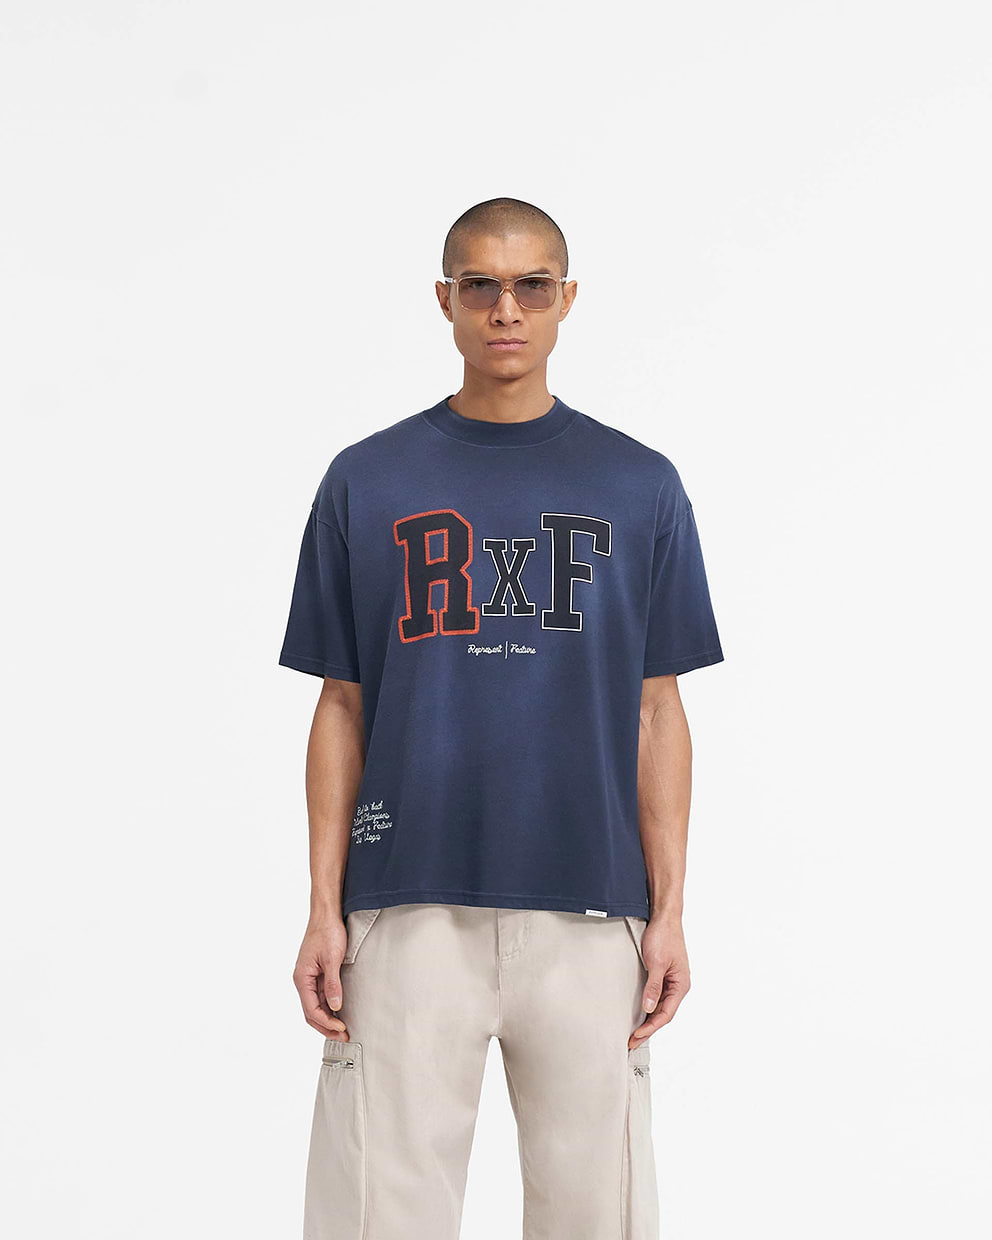 Represent X Feature Champions T-Shirt - Midnight Navy